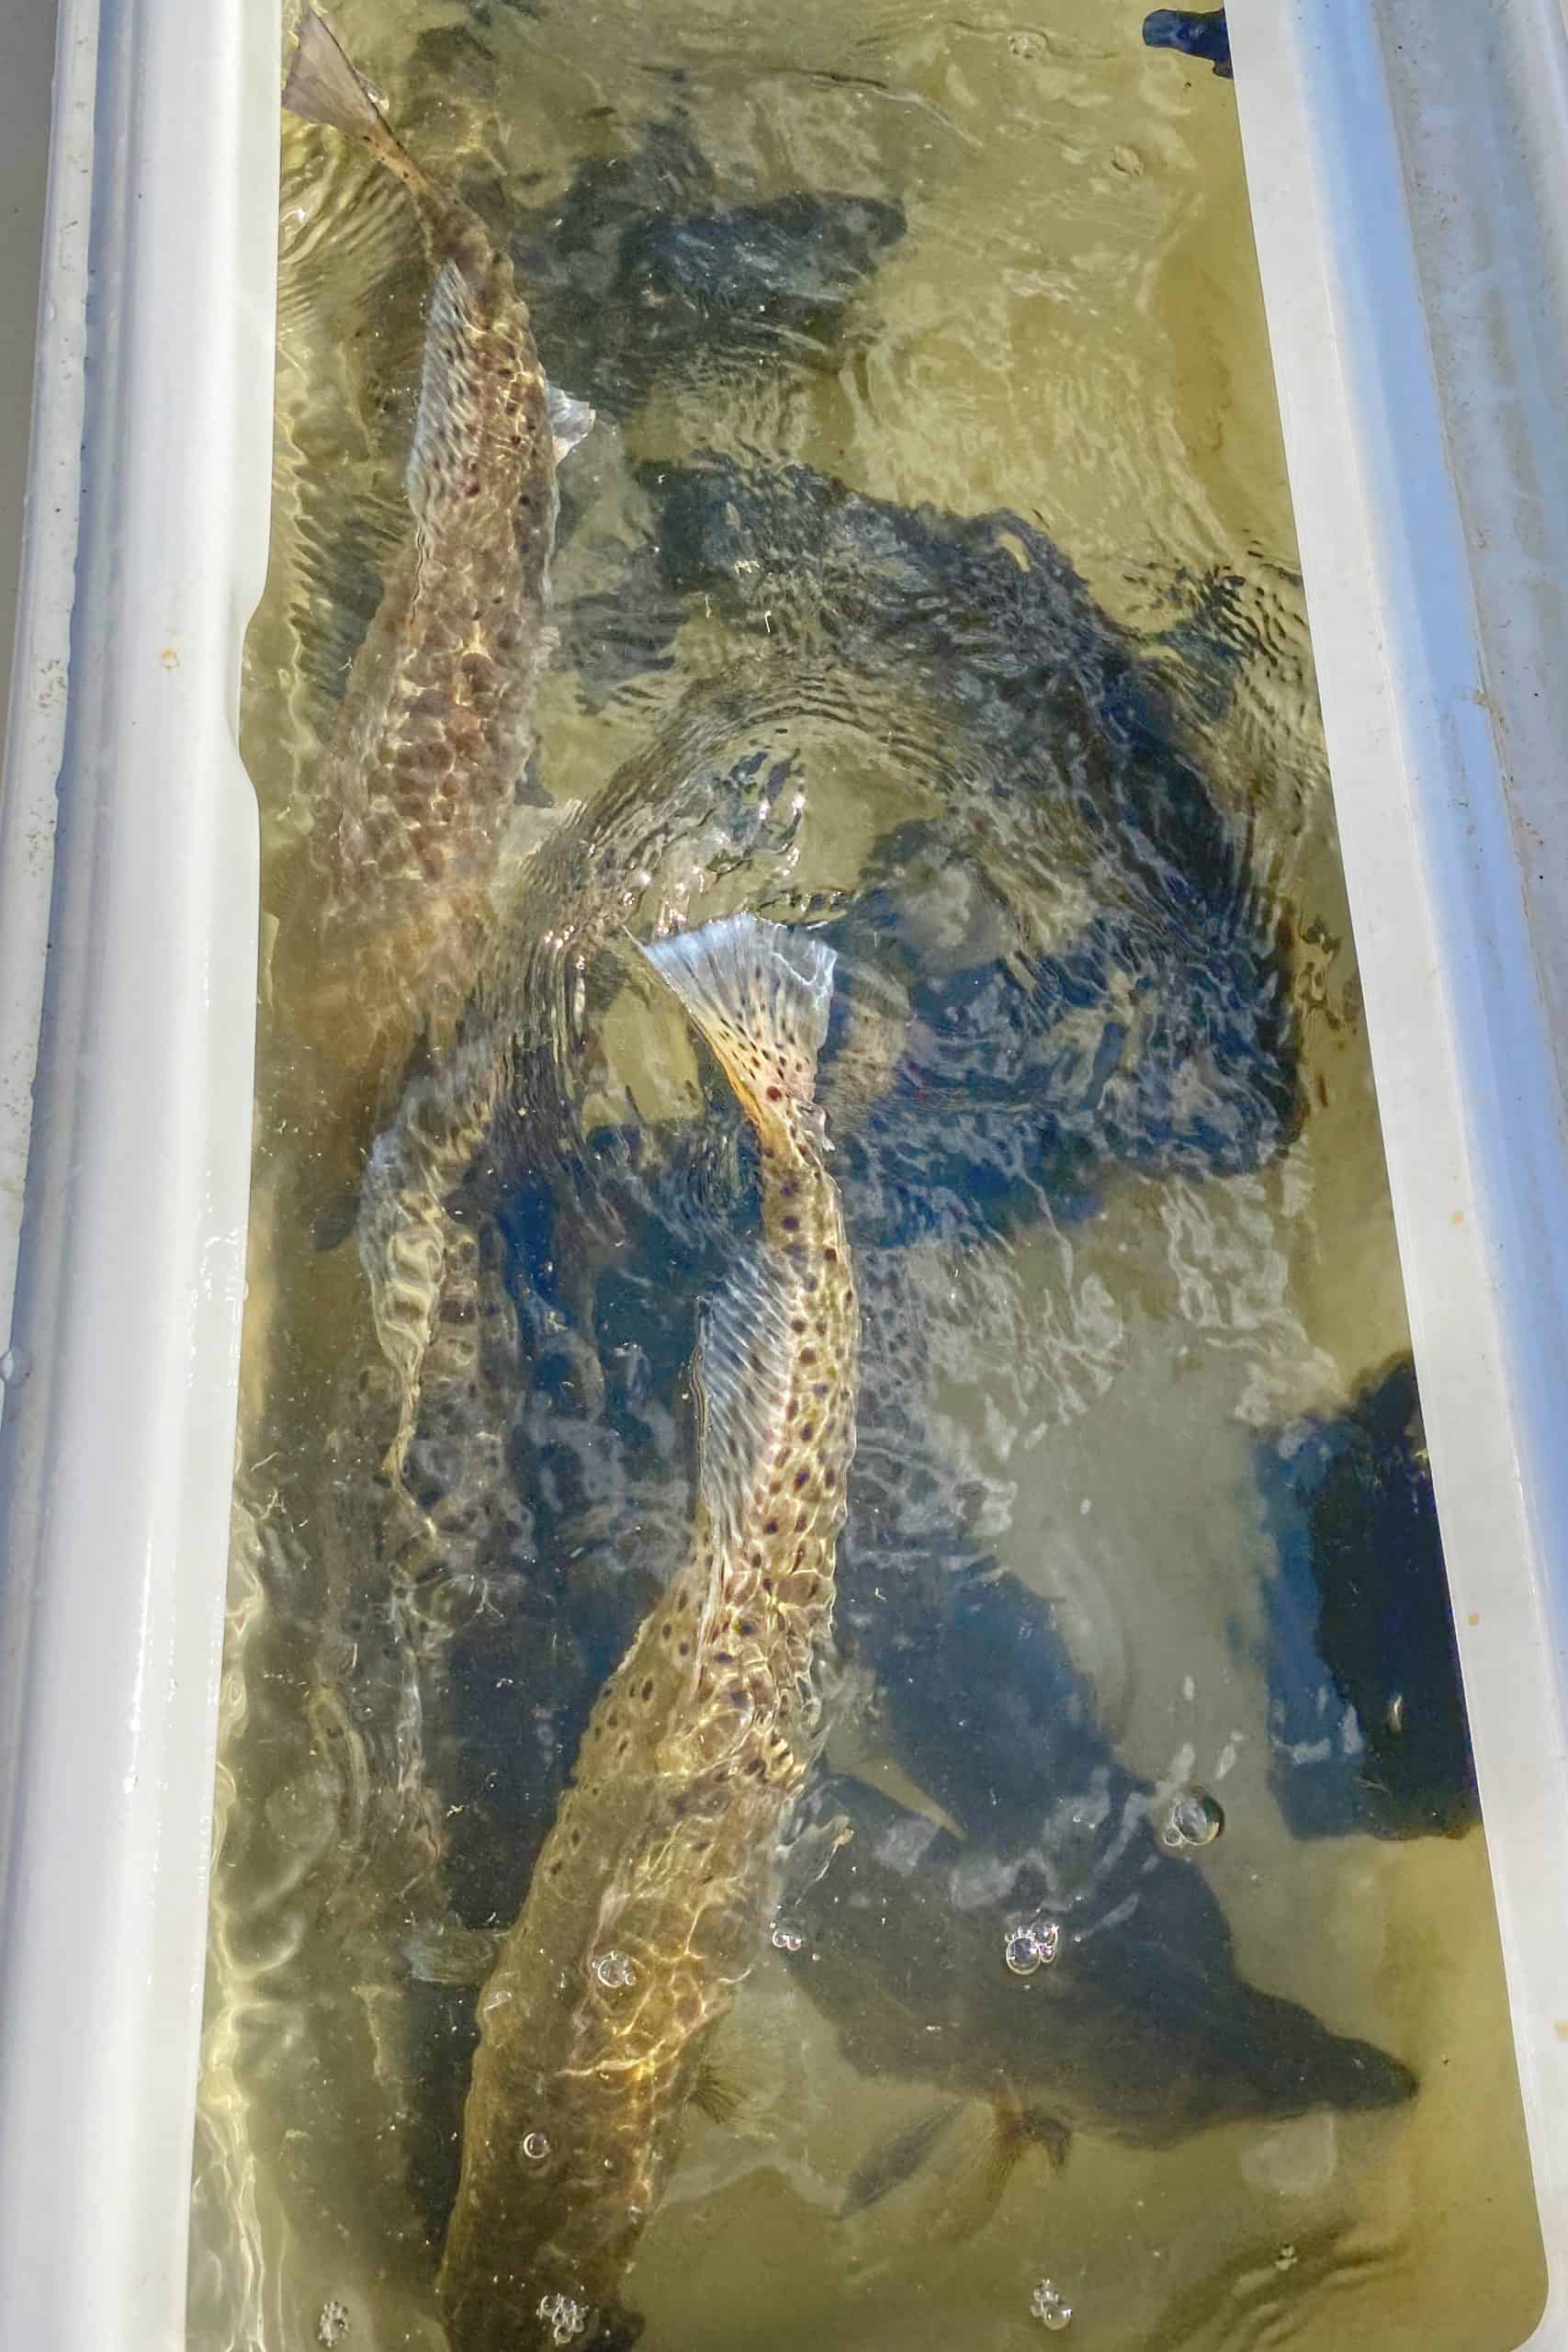 https://uglyfishing.com/wp-content/uploads/2023/02/how_to_keep_speckled_trout_alive-scaled.jpg